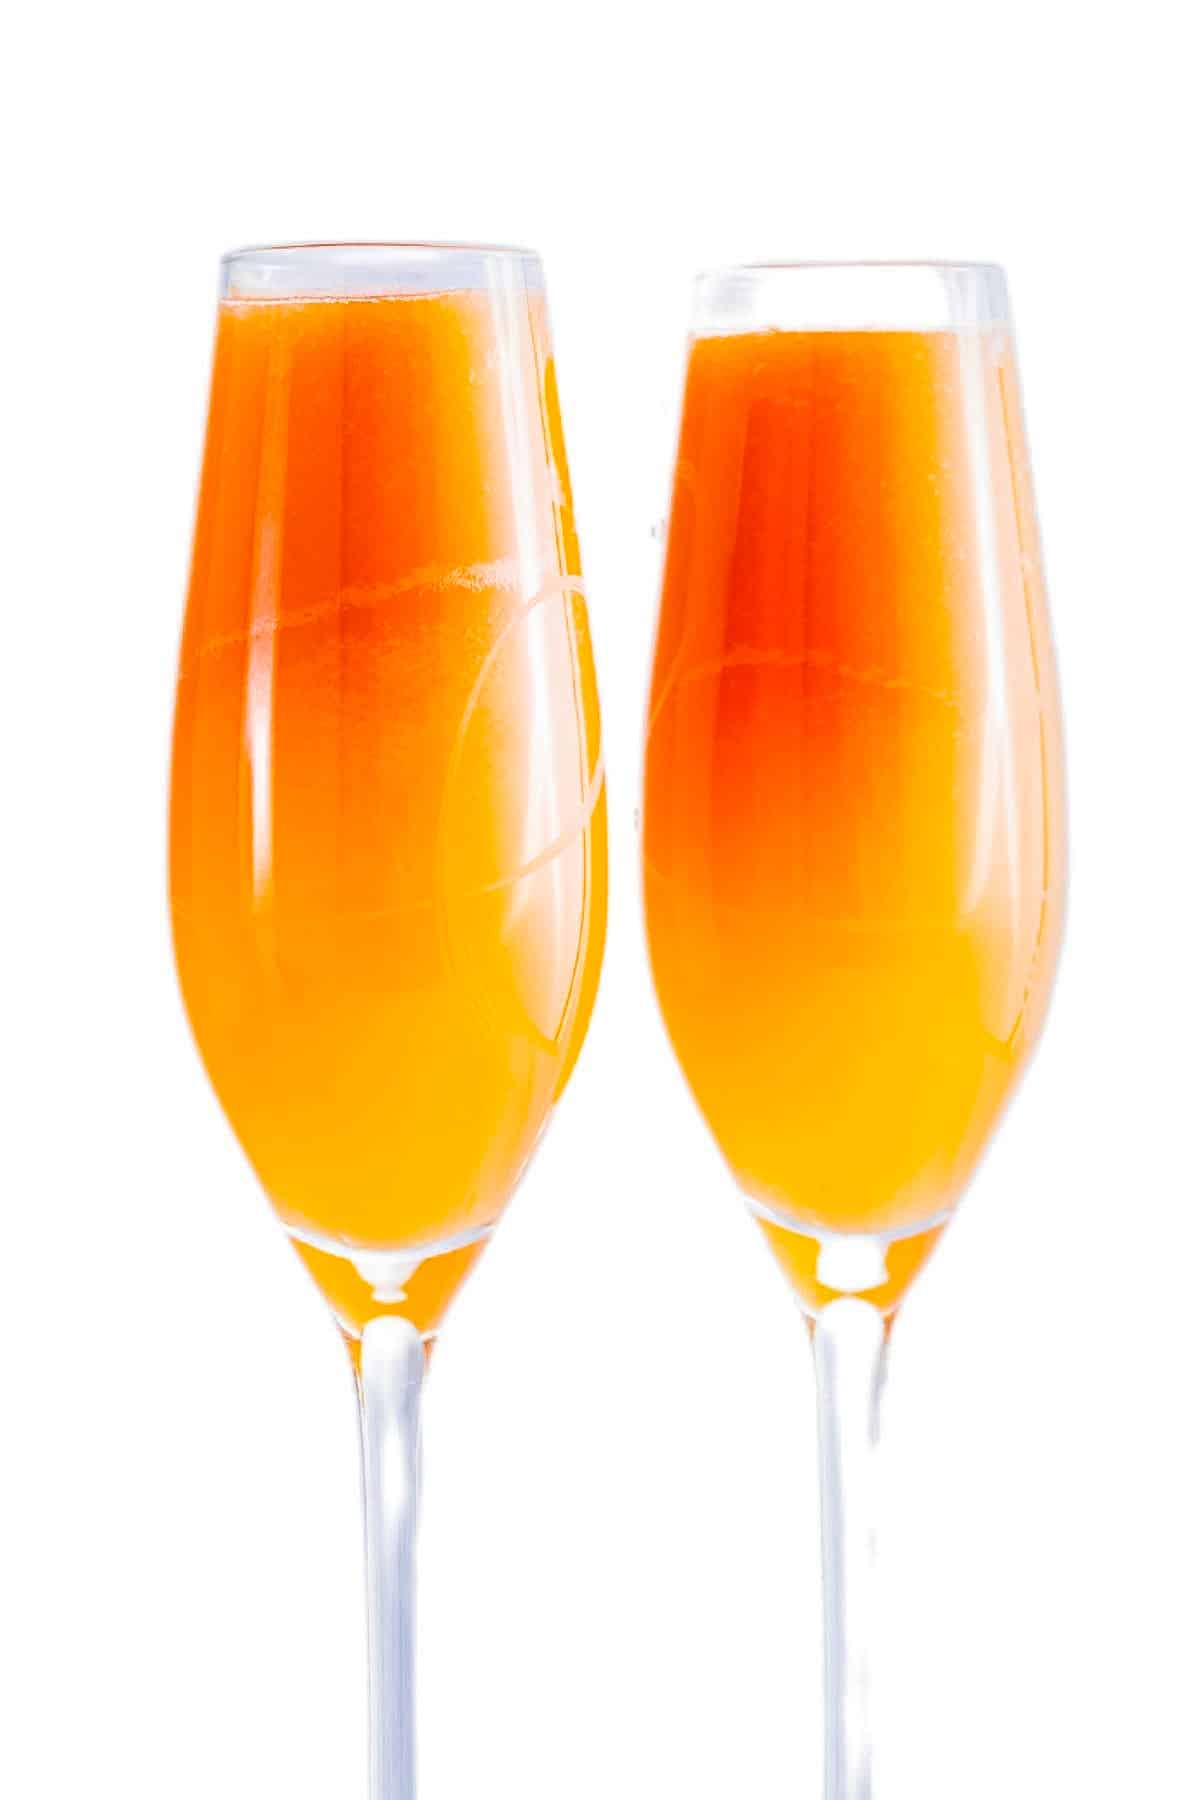 The 7 Best Sparkling Wines for Mimosas in 2023